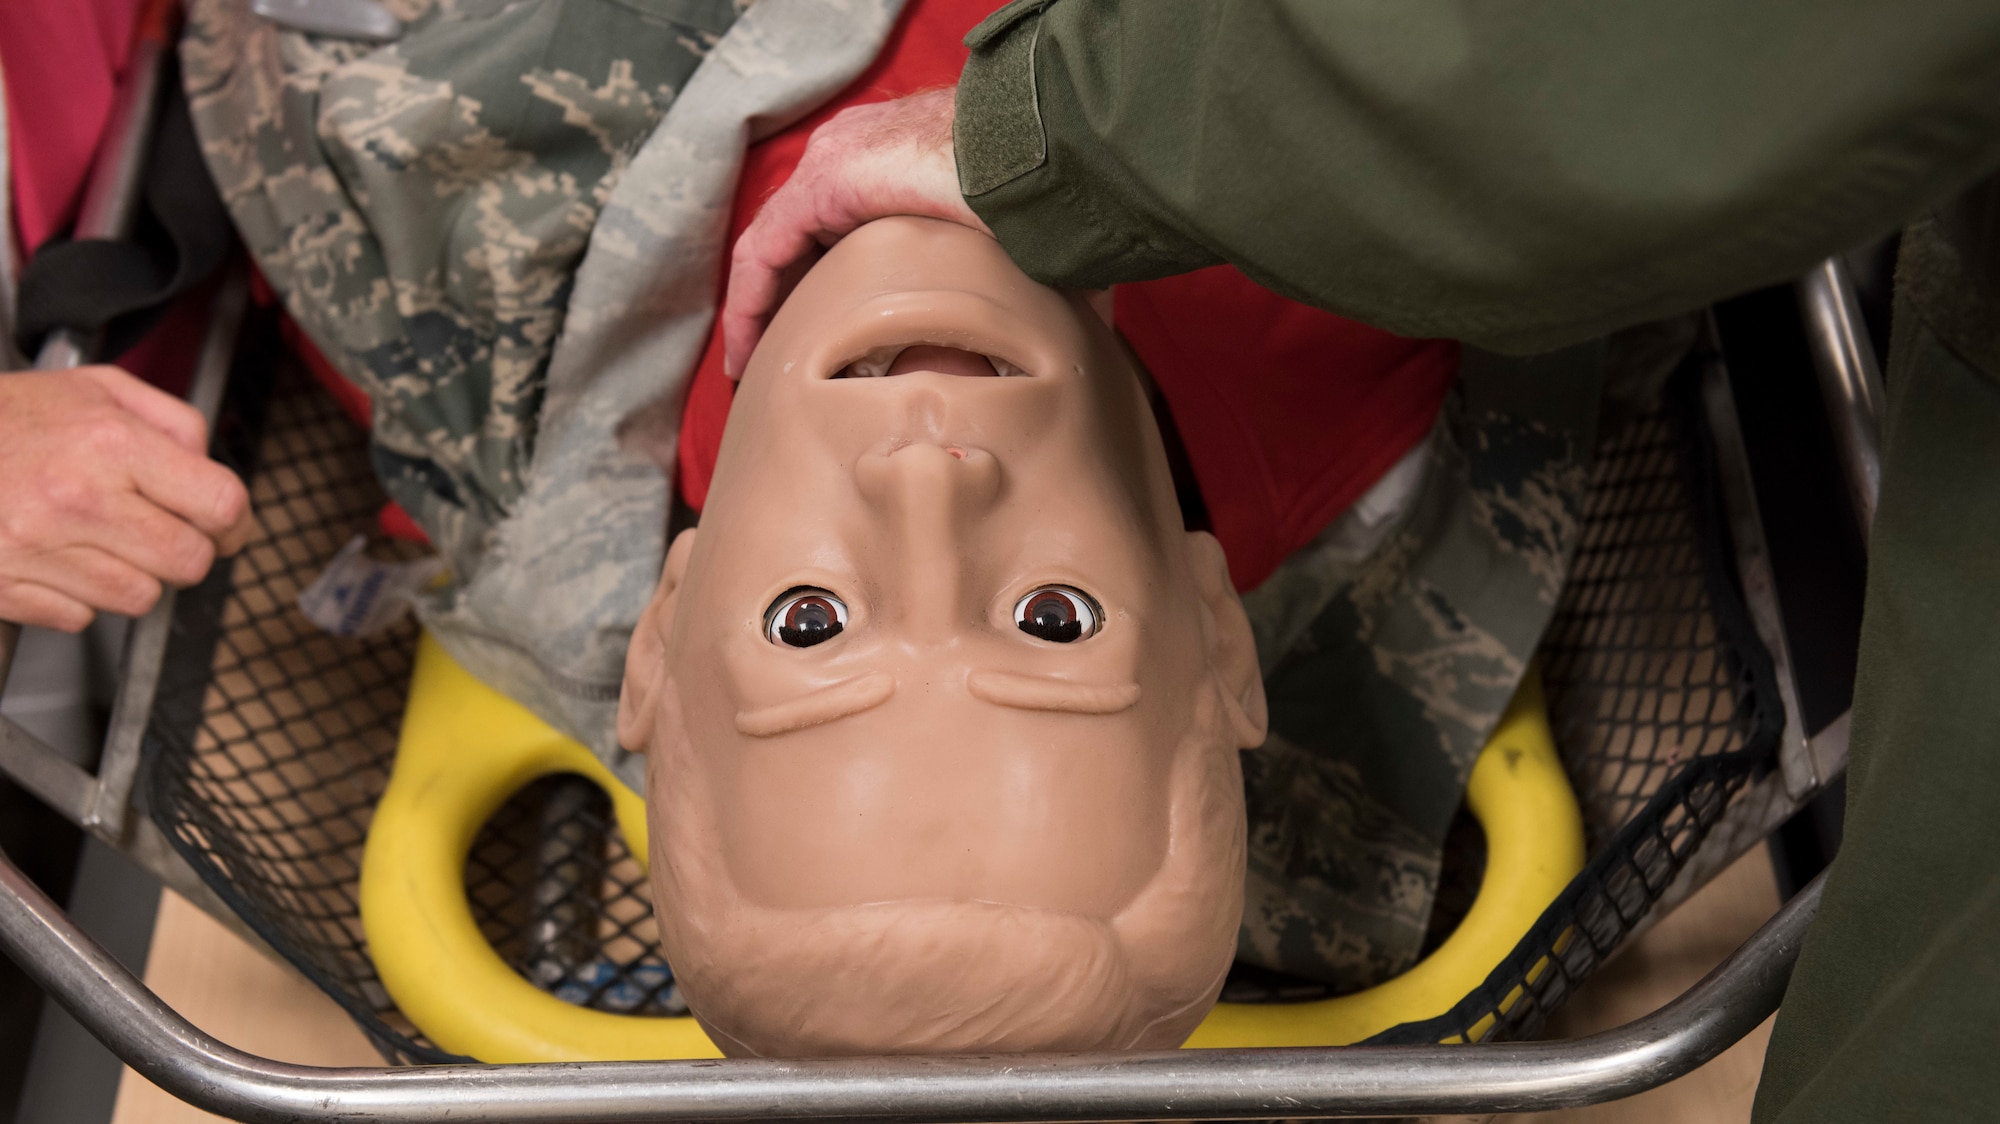 Students practice endotracheal intubation procedures on a training mannequin during the Tactical Combat Casualty Care course at Fairchild Air Force Base, Washington, Sept. 12, 2019. In a continued effort to save lives, the U.S. Air Force Surgeon General has mandated that all personnel quickly become TCCC certified. (U.S. Air Force photo by Senior Airman Ryan Lackey)